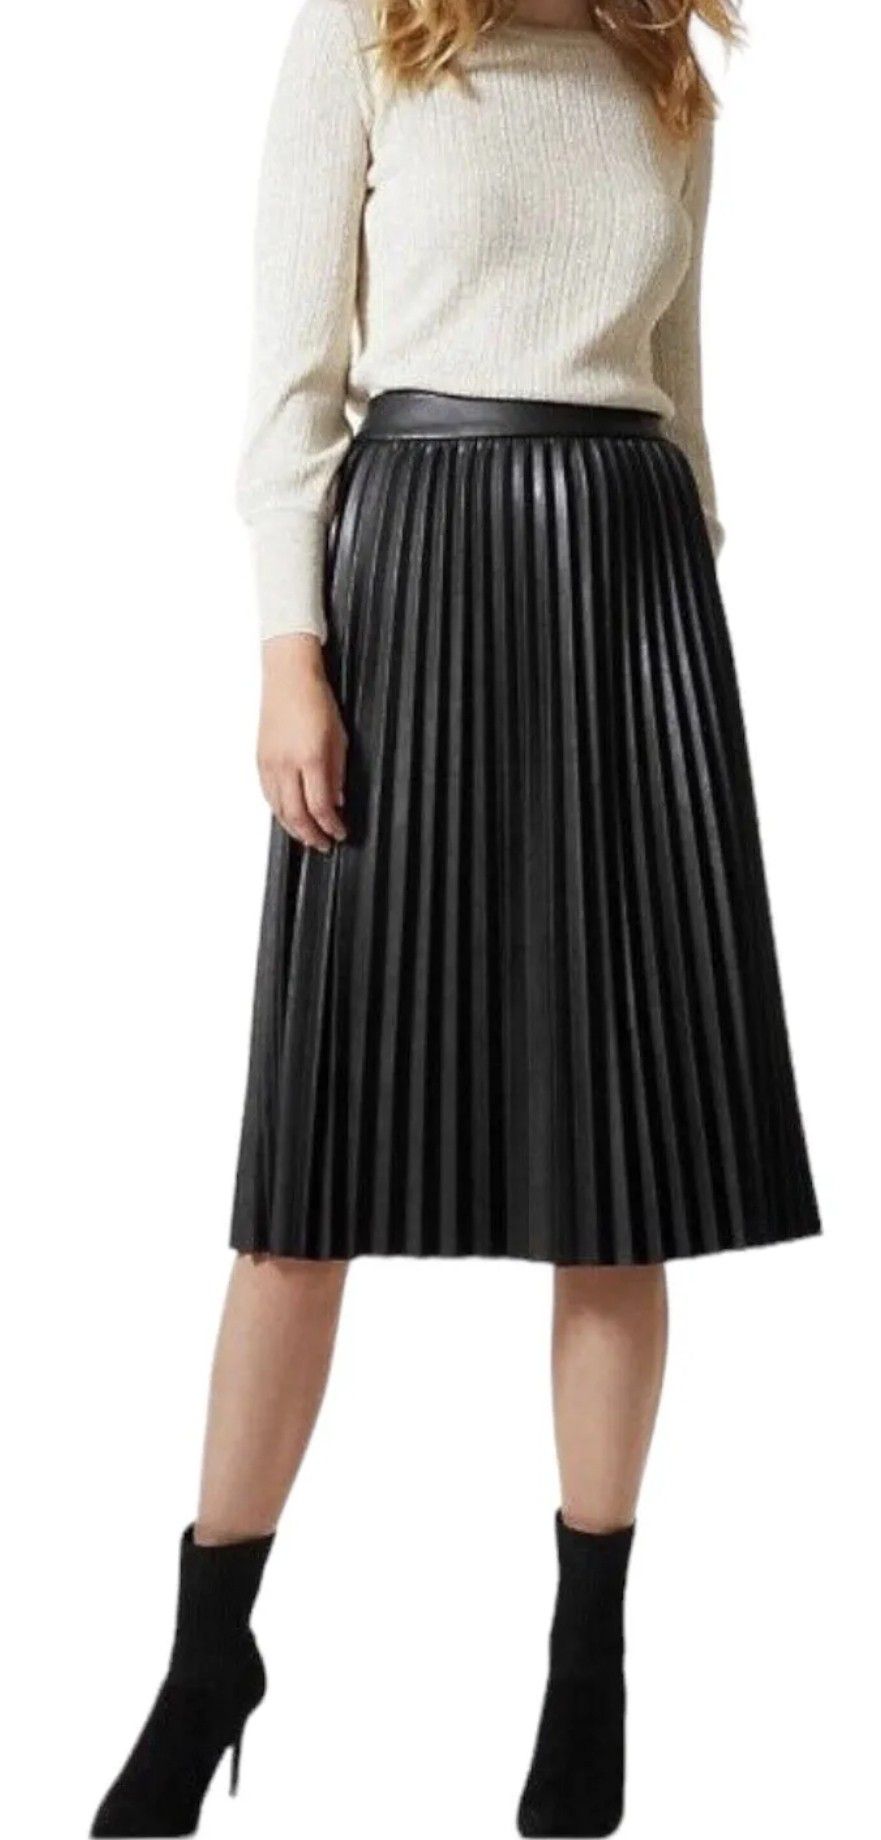 Monteau Black Faux Leather Pleated A-Line Skirt